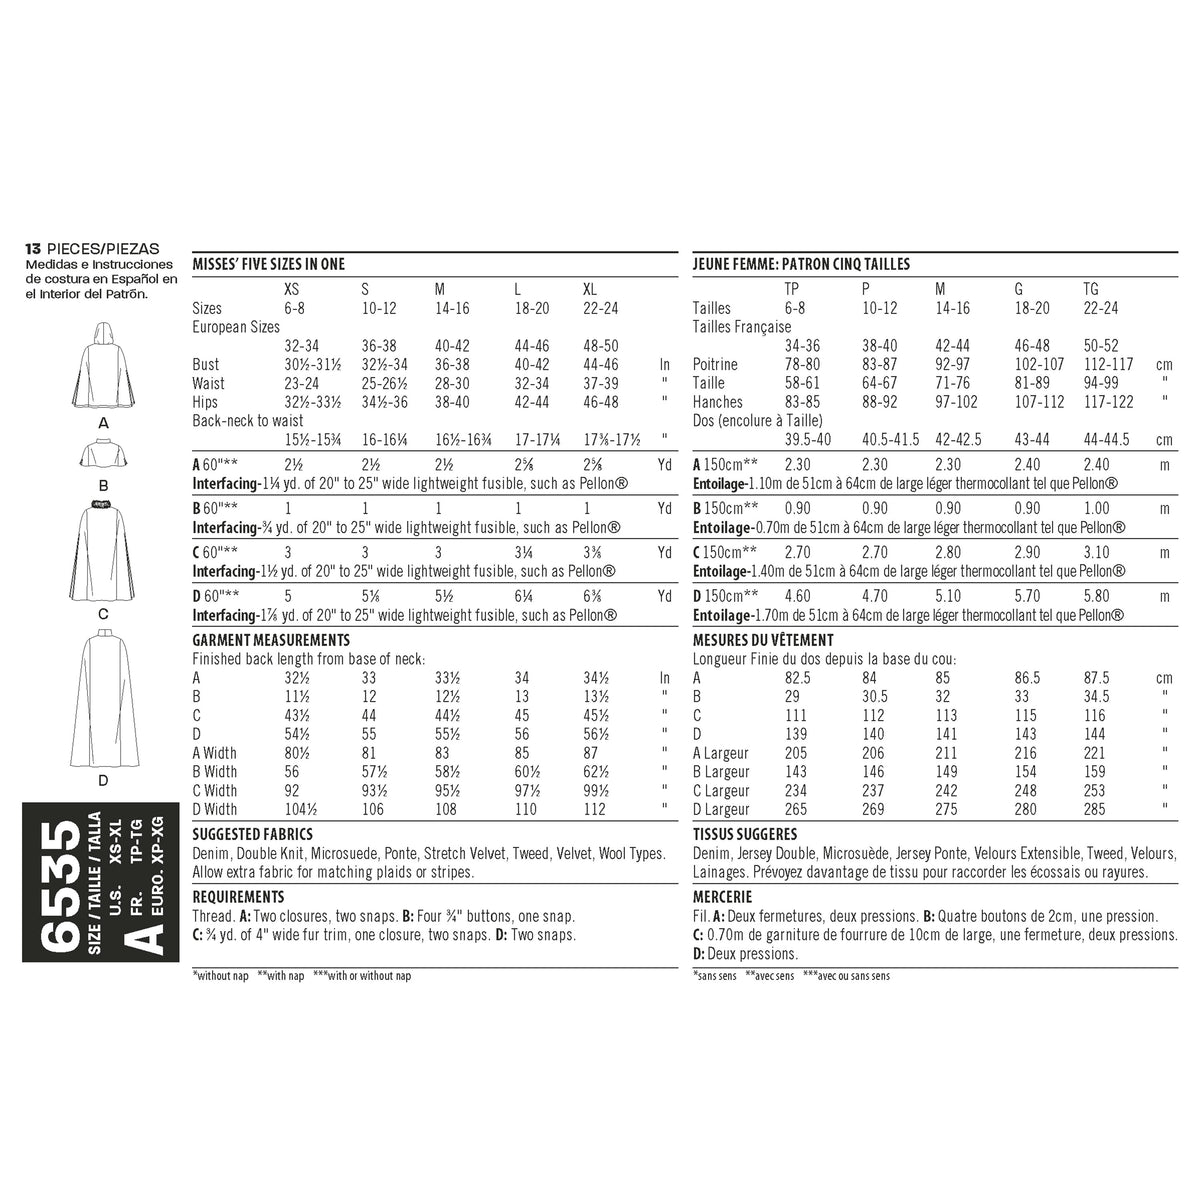 6535 New Look Pattern 6535 Women's Capes in Four Lengths